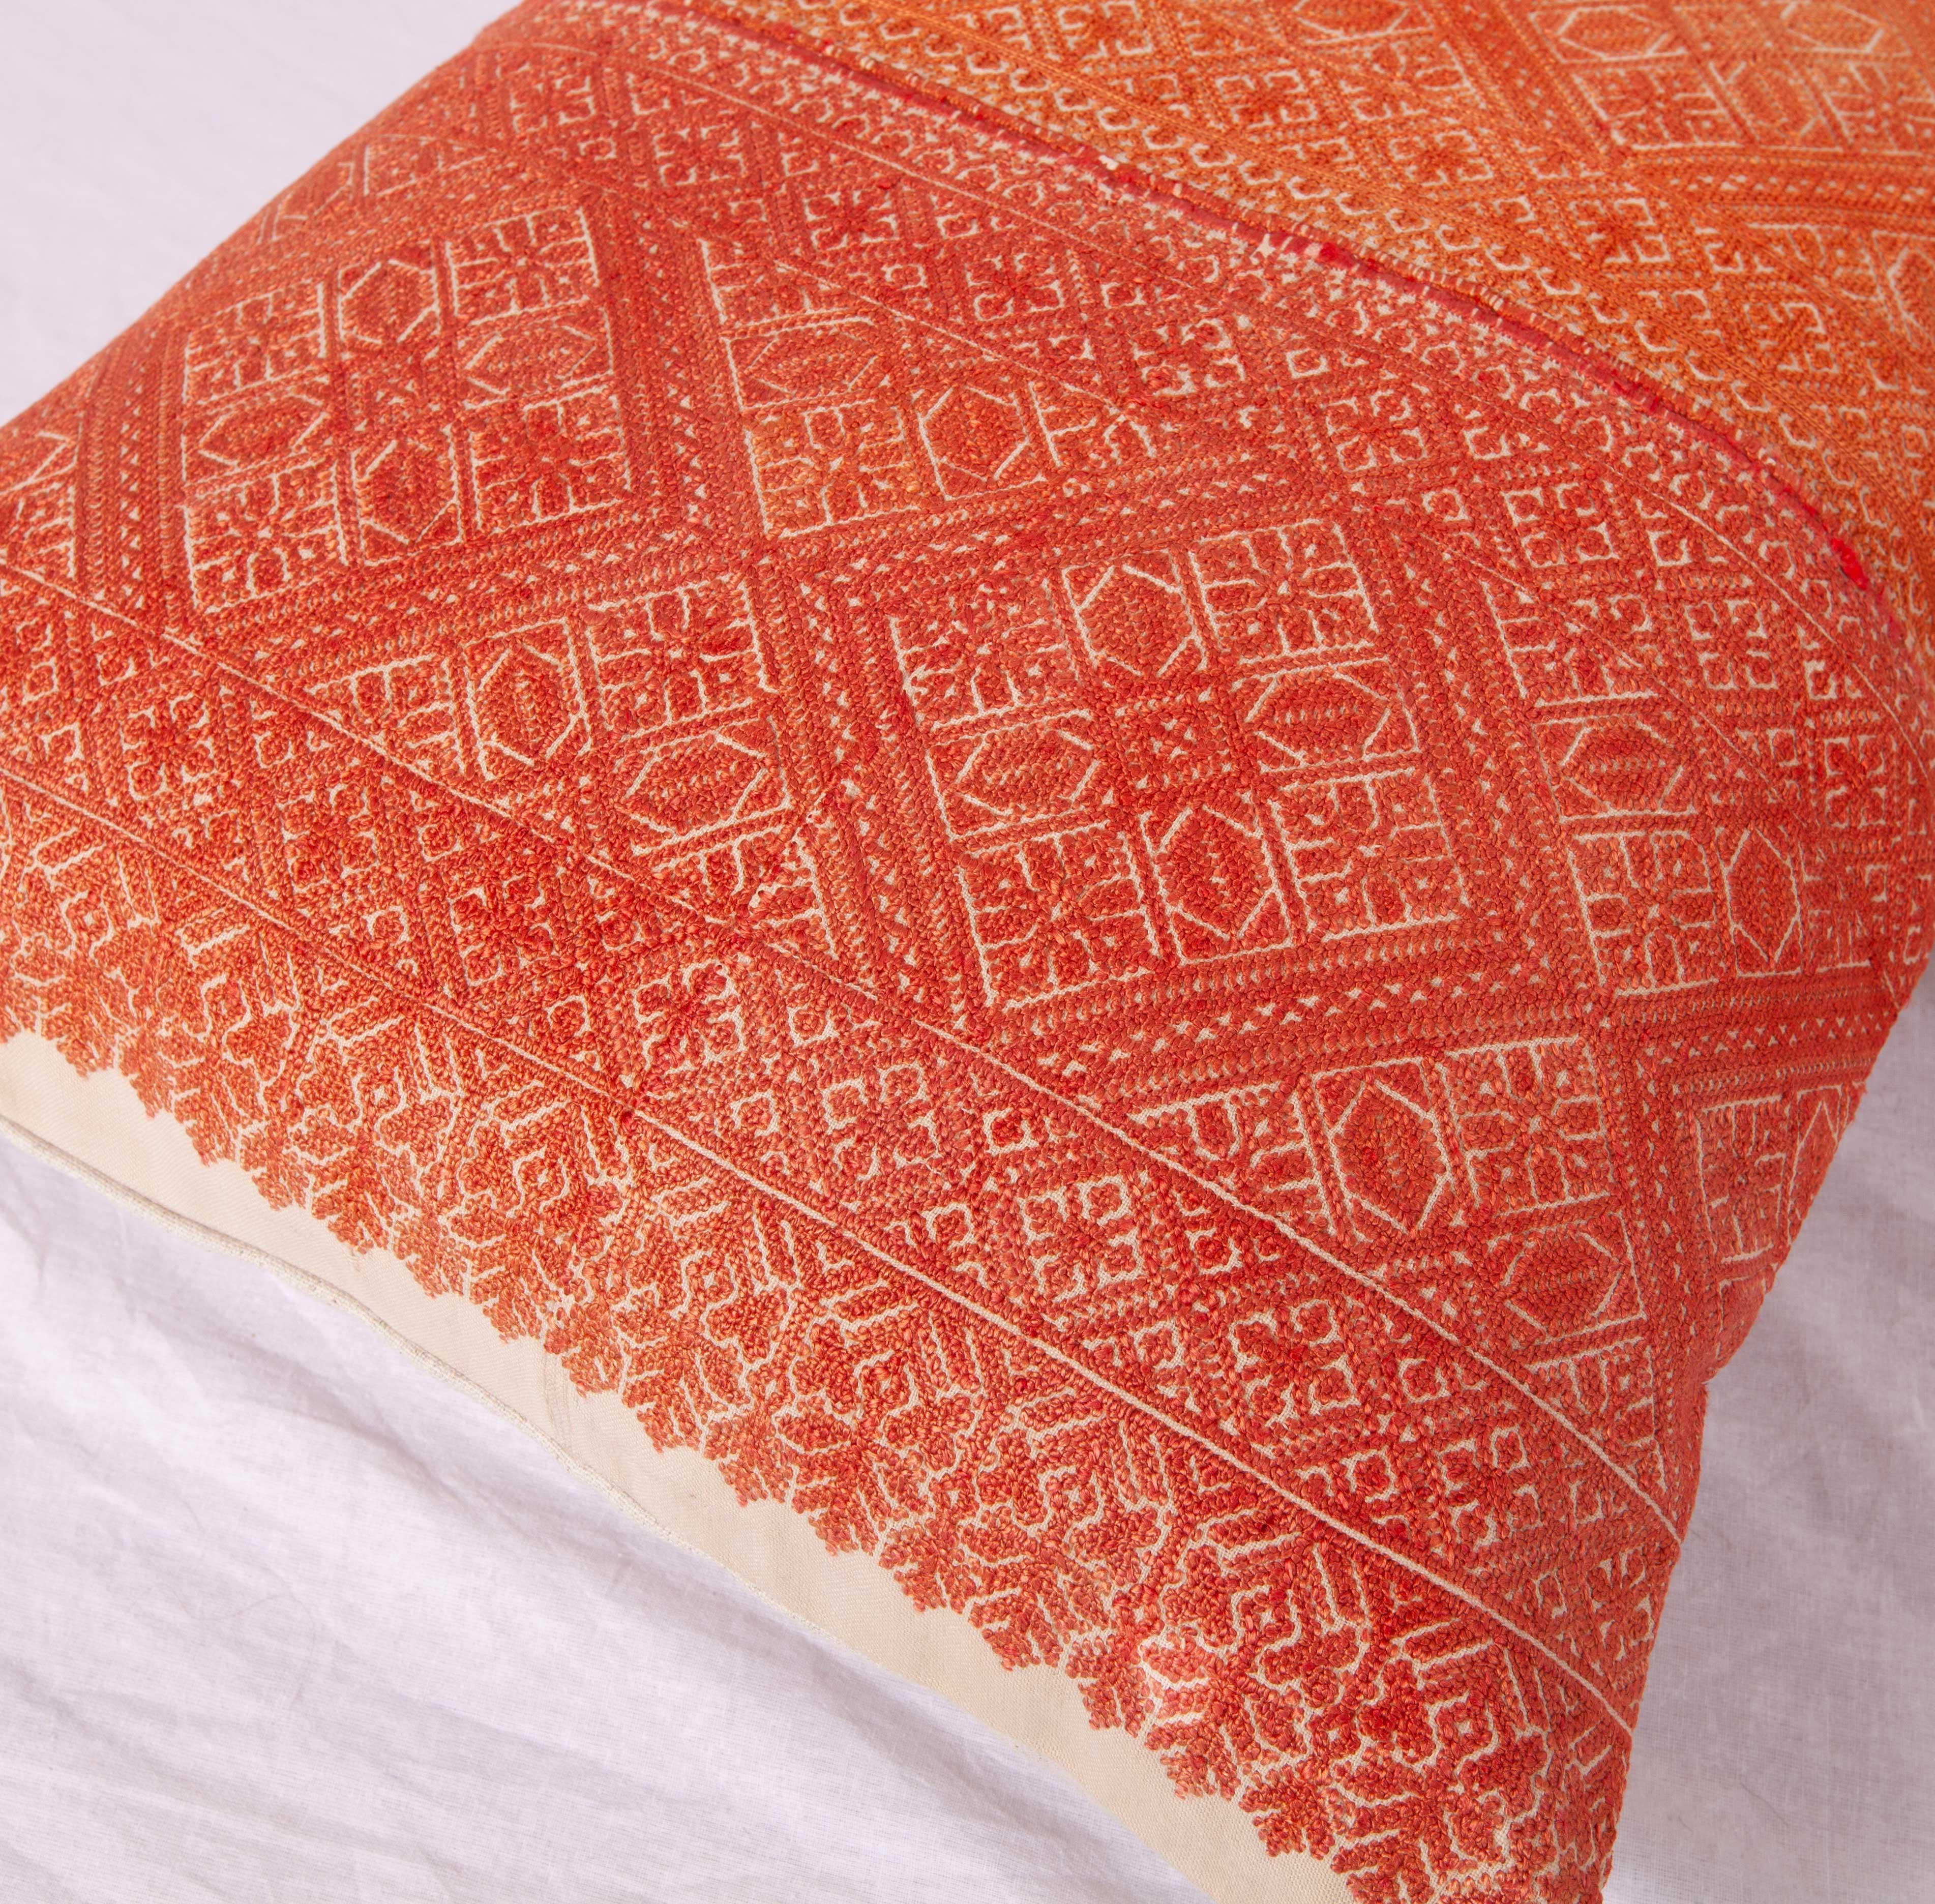 Silk Pillow Cases Made from an Early 20th Century Fez Embroidery from Morocco